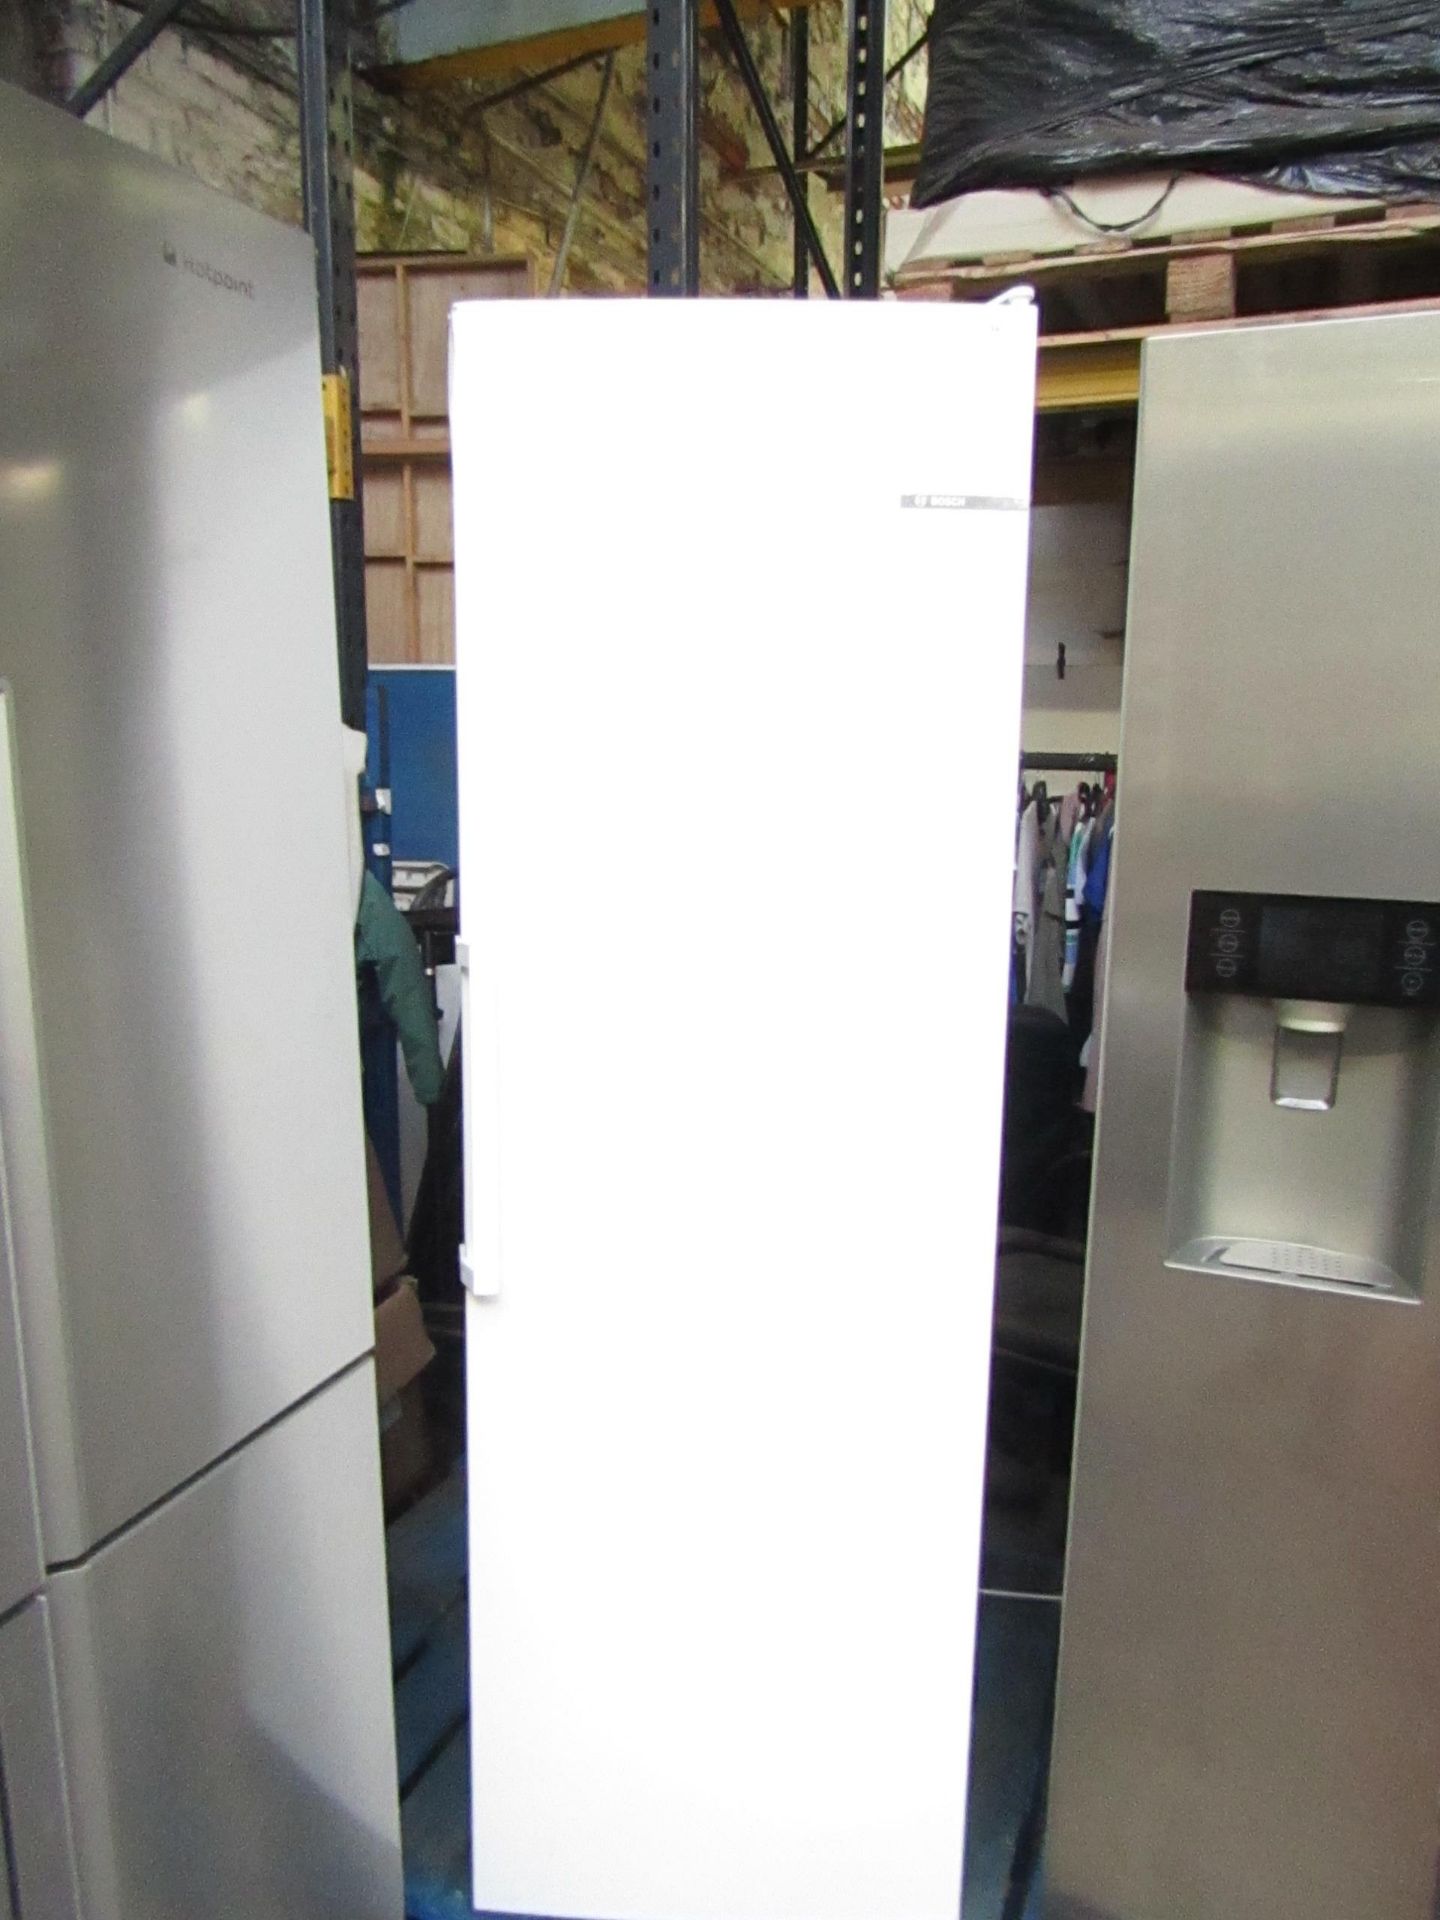 Bosch Freestanding tall freezer, Tested working but has damage to the top of the door, does not